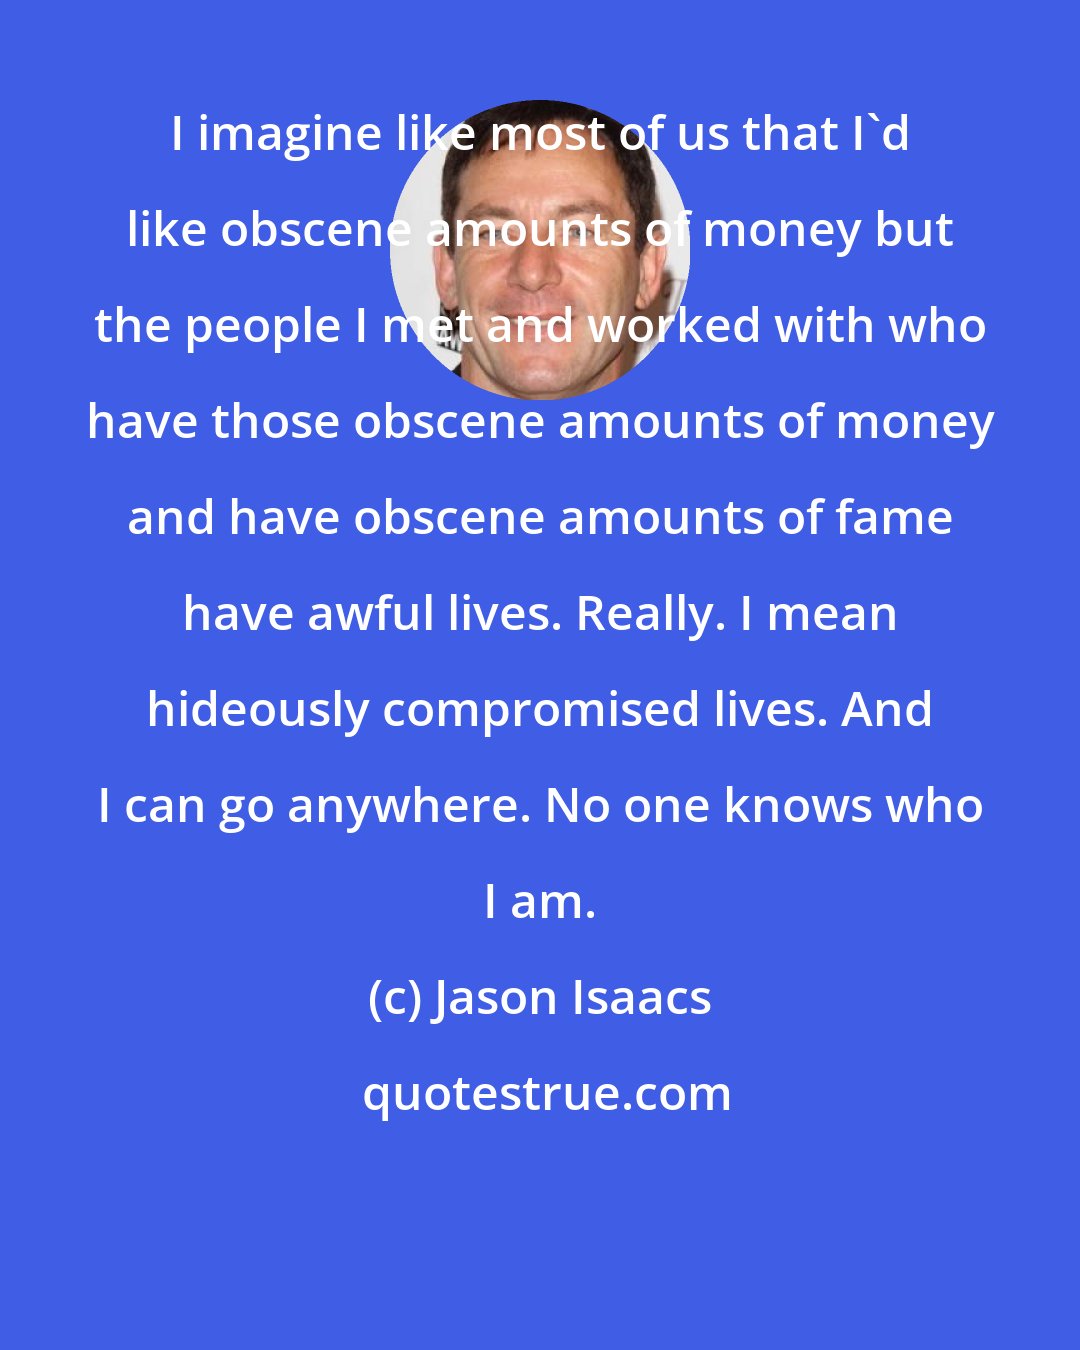 Jason Isaacs: I imagine like most of us that I'd like obscene amounts of money but the people I met and worked with who have those obscene amounts of money and have obscene amounts of fame have awful lives. Really. I mean hideously compromised lives. And I can go anywhere. No one knows who I am.